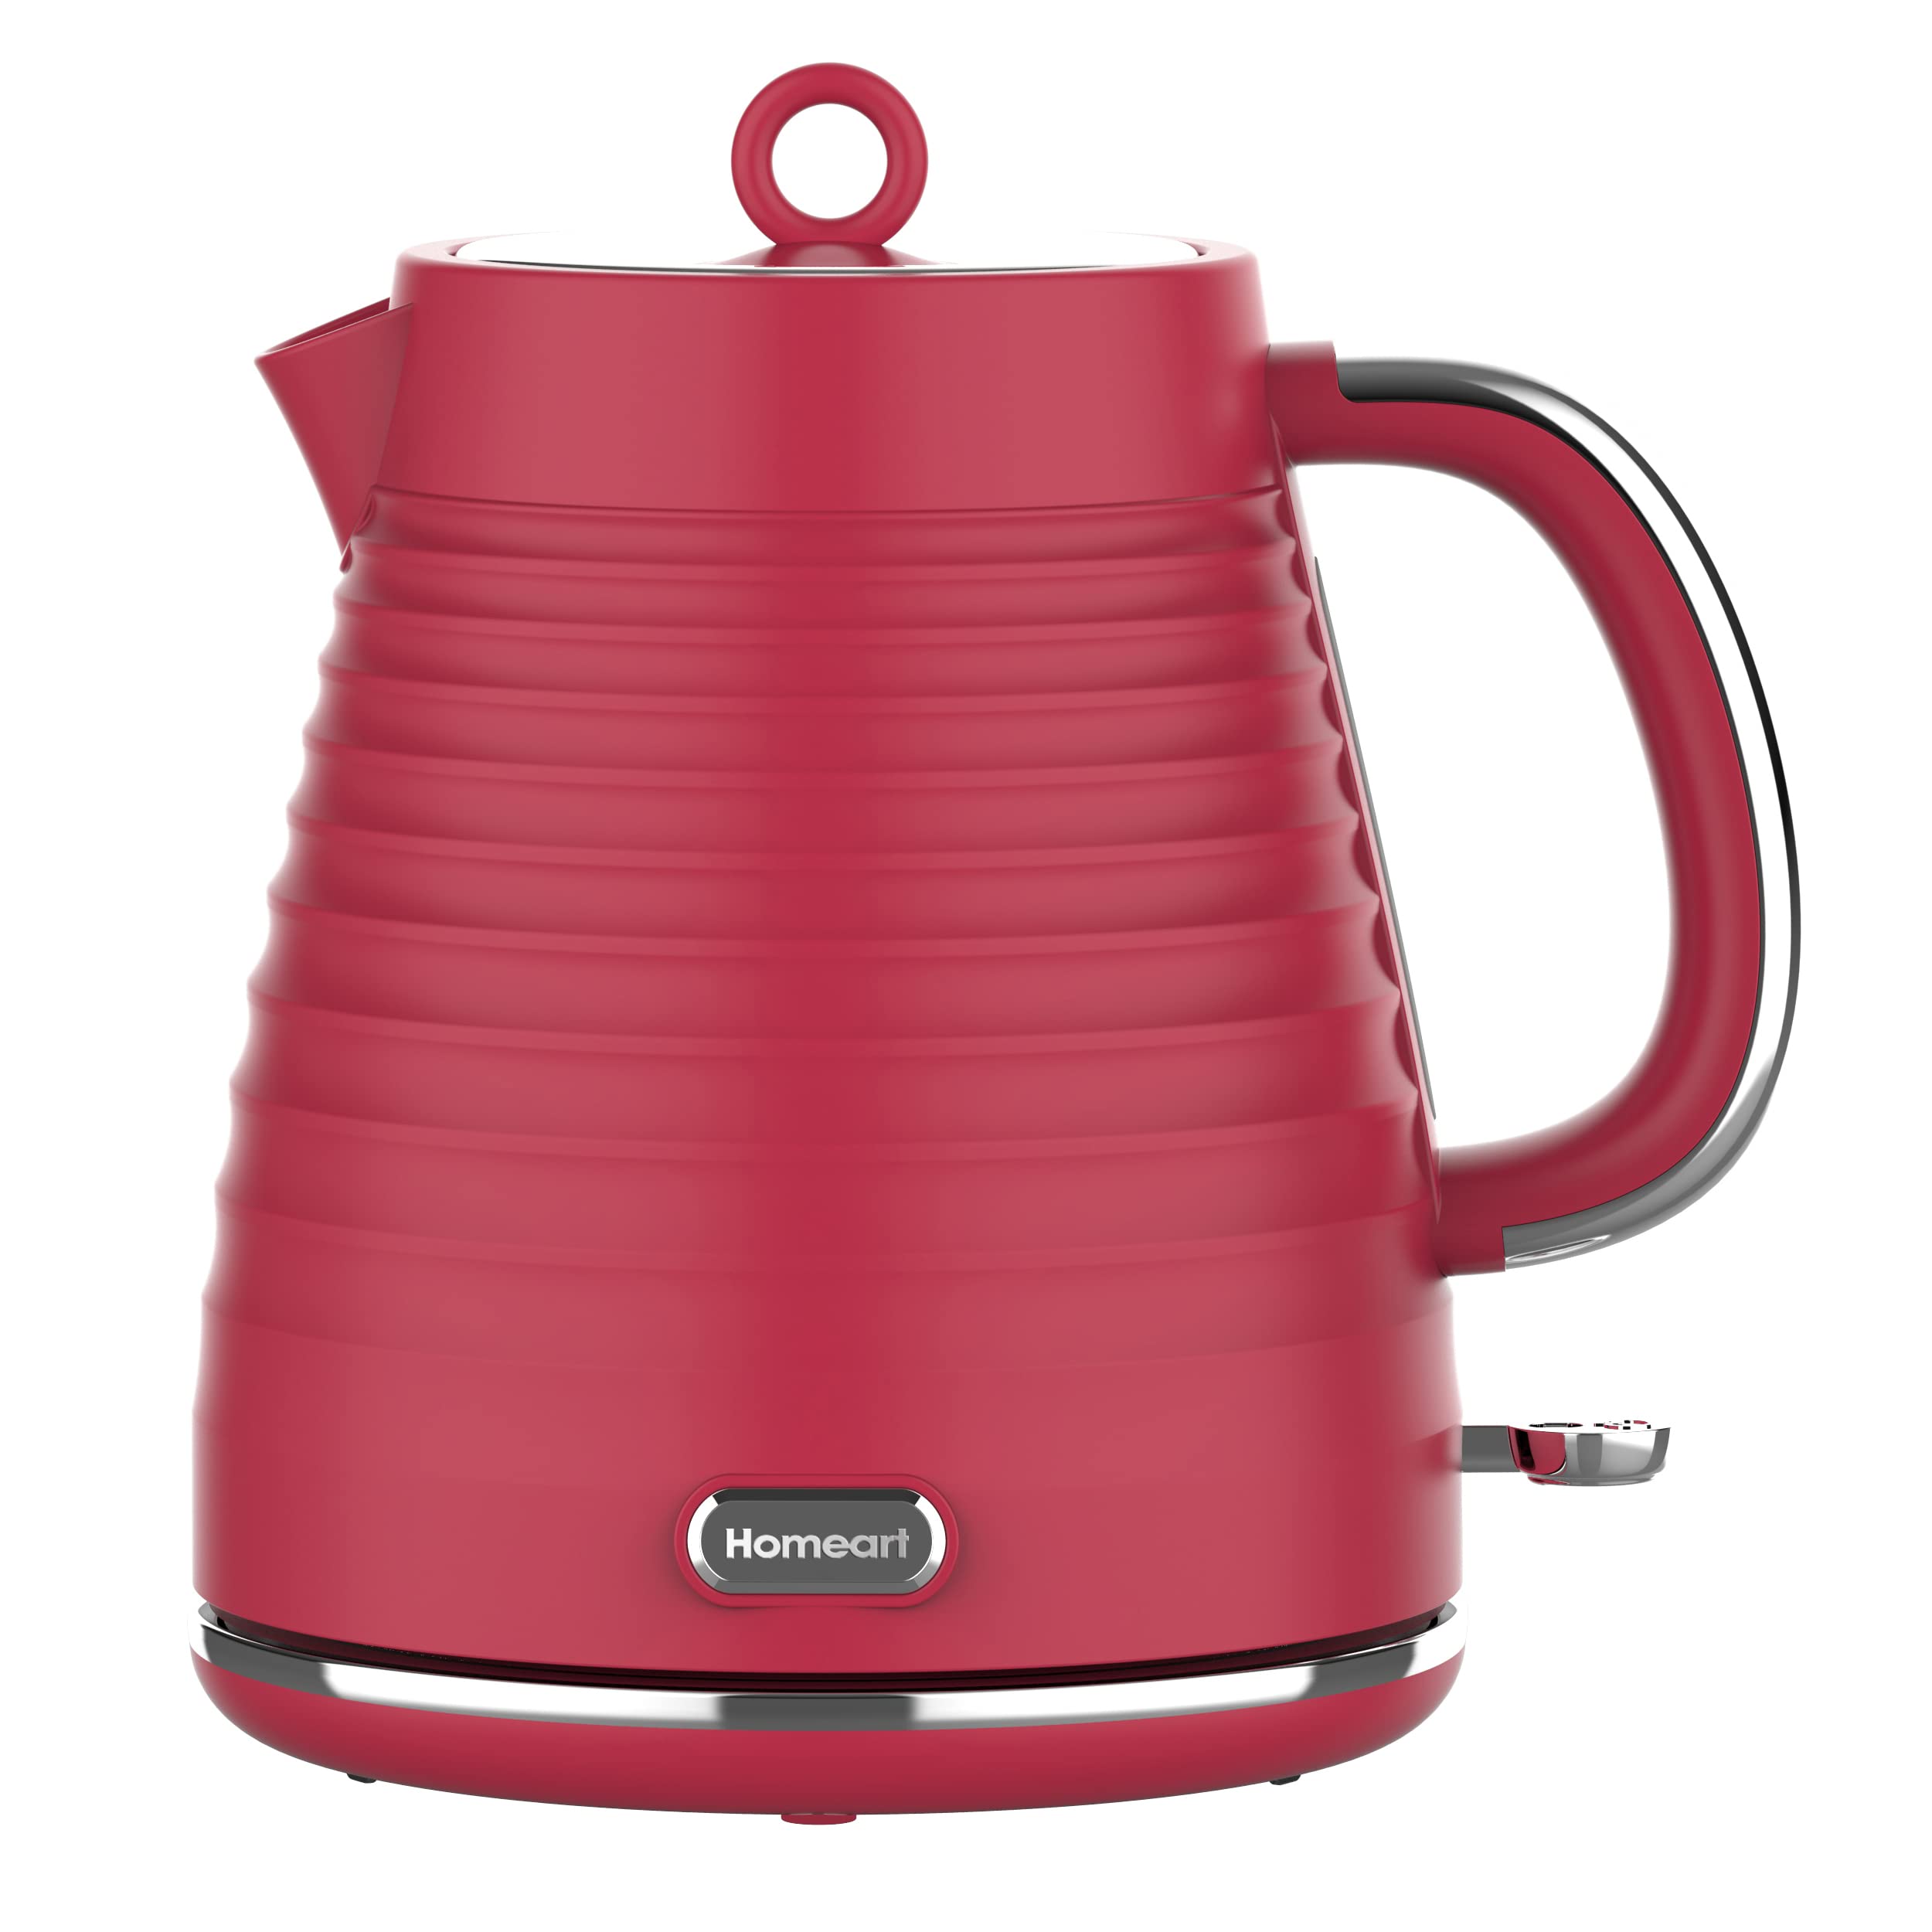 Homeart Riva 1.7L Electric Kettle with Removable Limescale Filter, Red